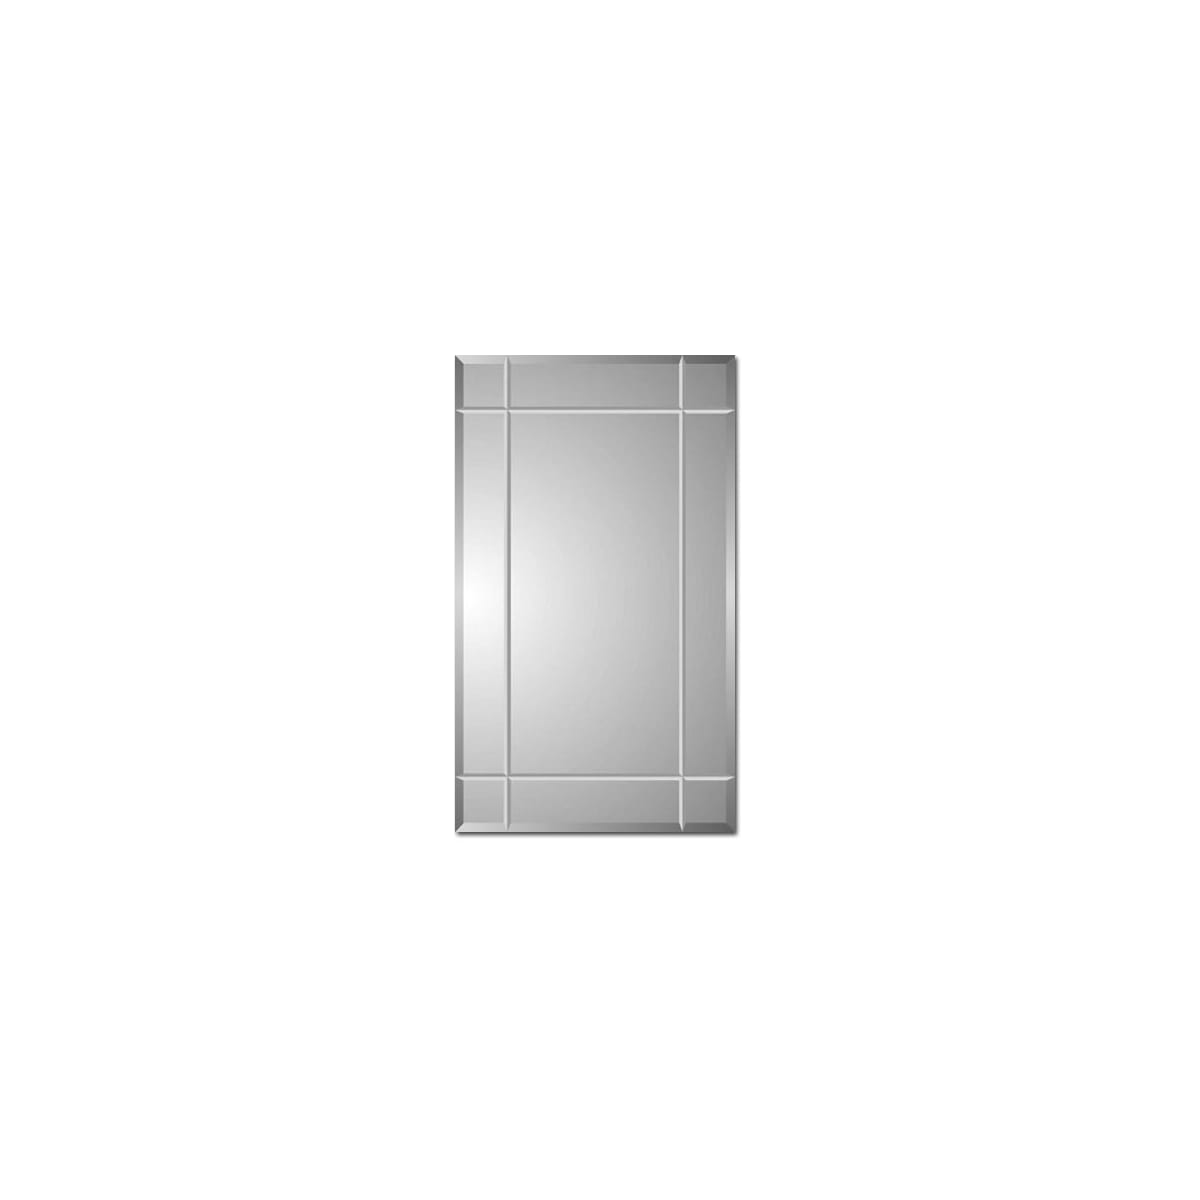 Model# 24-2-26-00 Four Groove Mirror Medicine Cabinet with 6